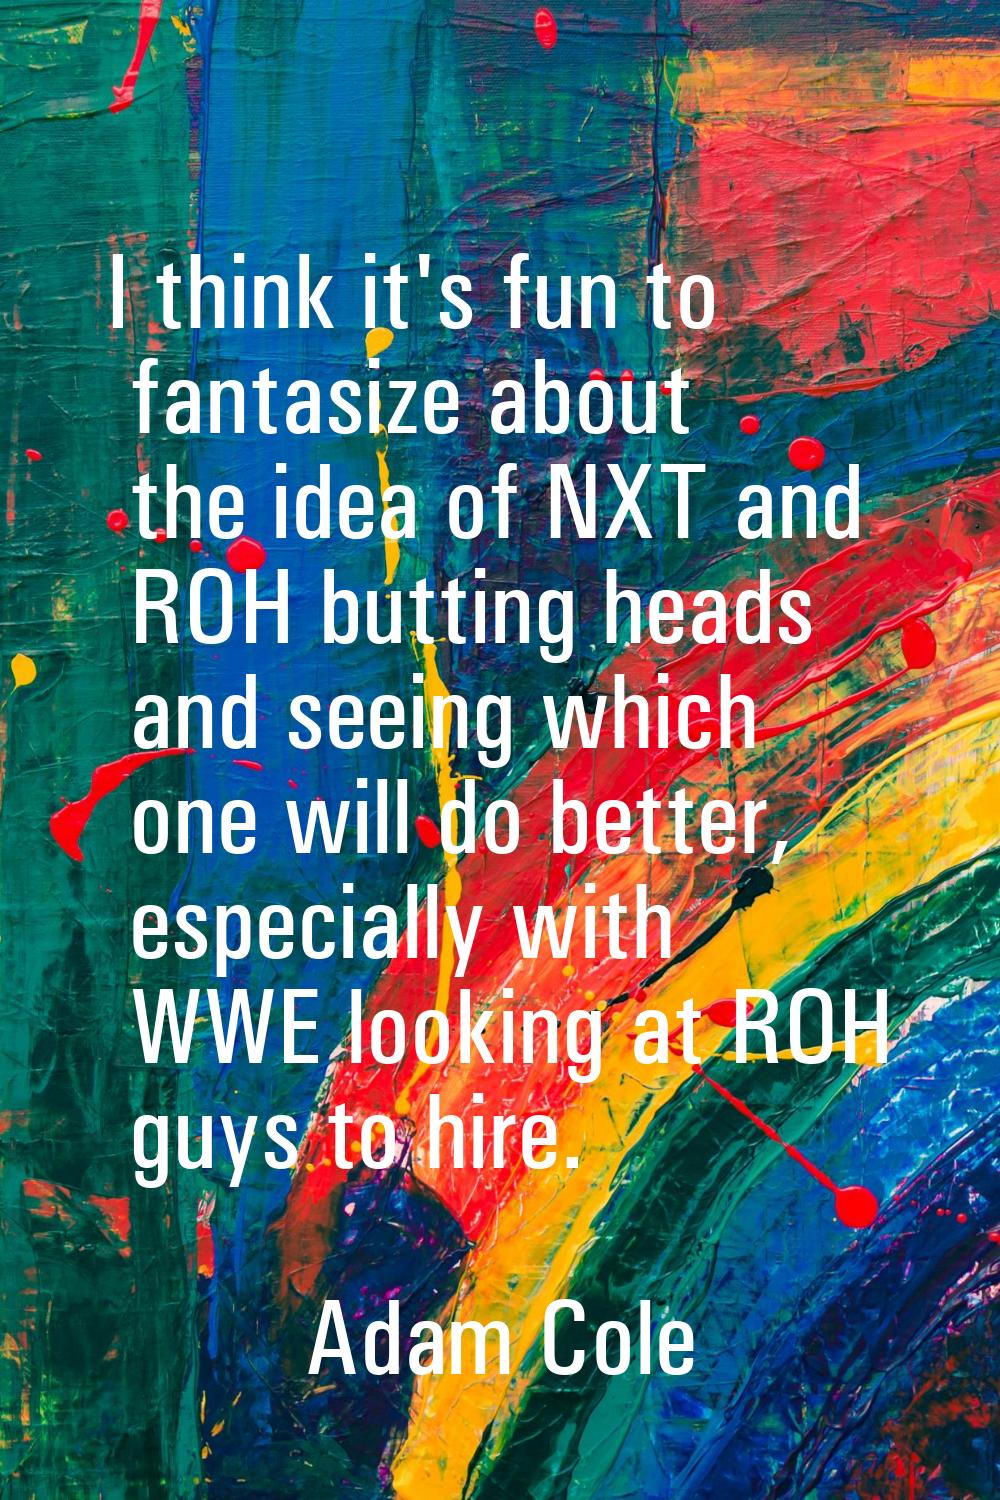 I think it's fun to fantasize about the idea of NXT and ROH butting heads and seeing which one will